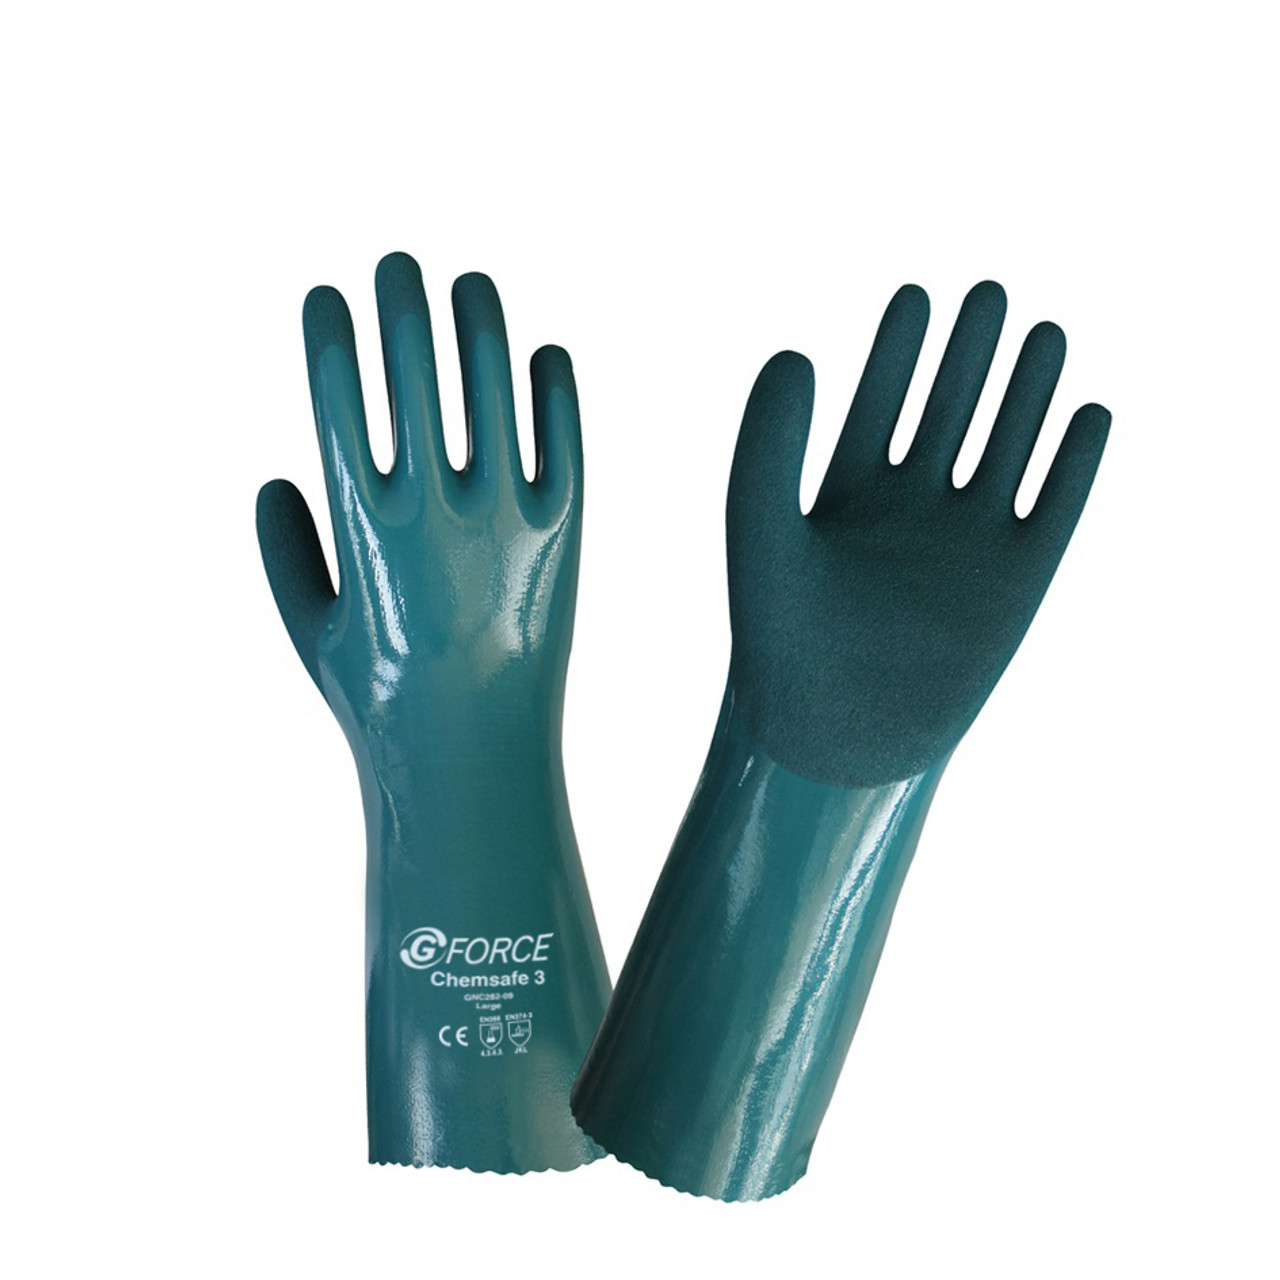 G-Force Chemsafe Cut E Glove, Xlarge, Retail Carded